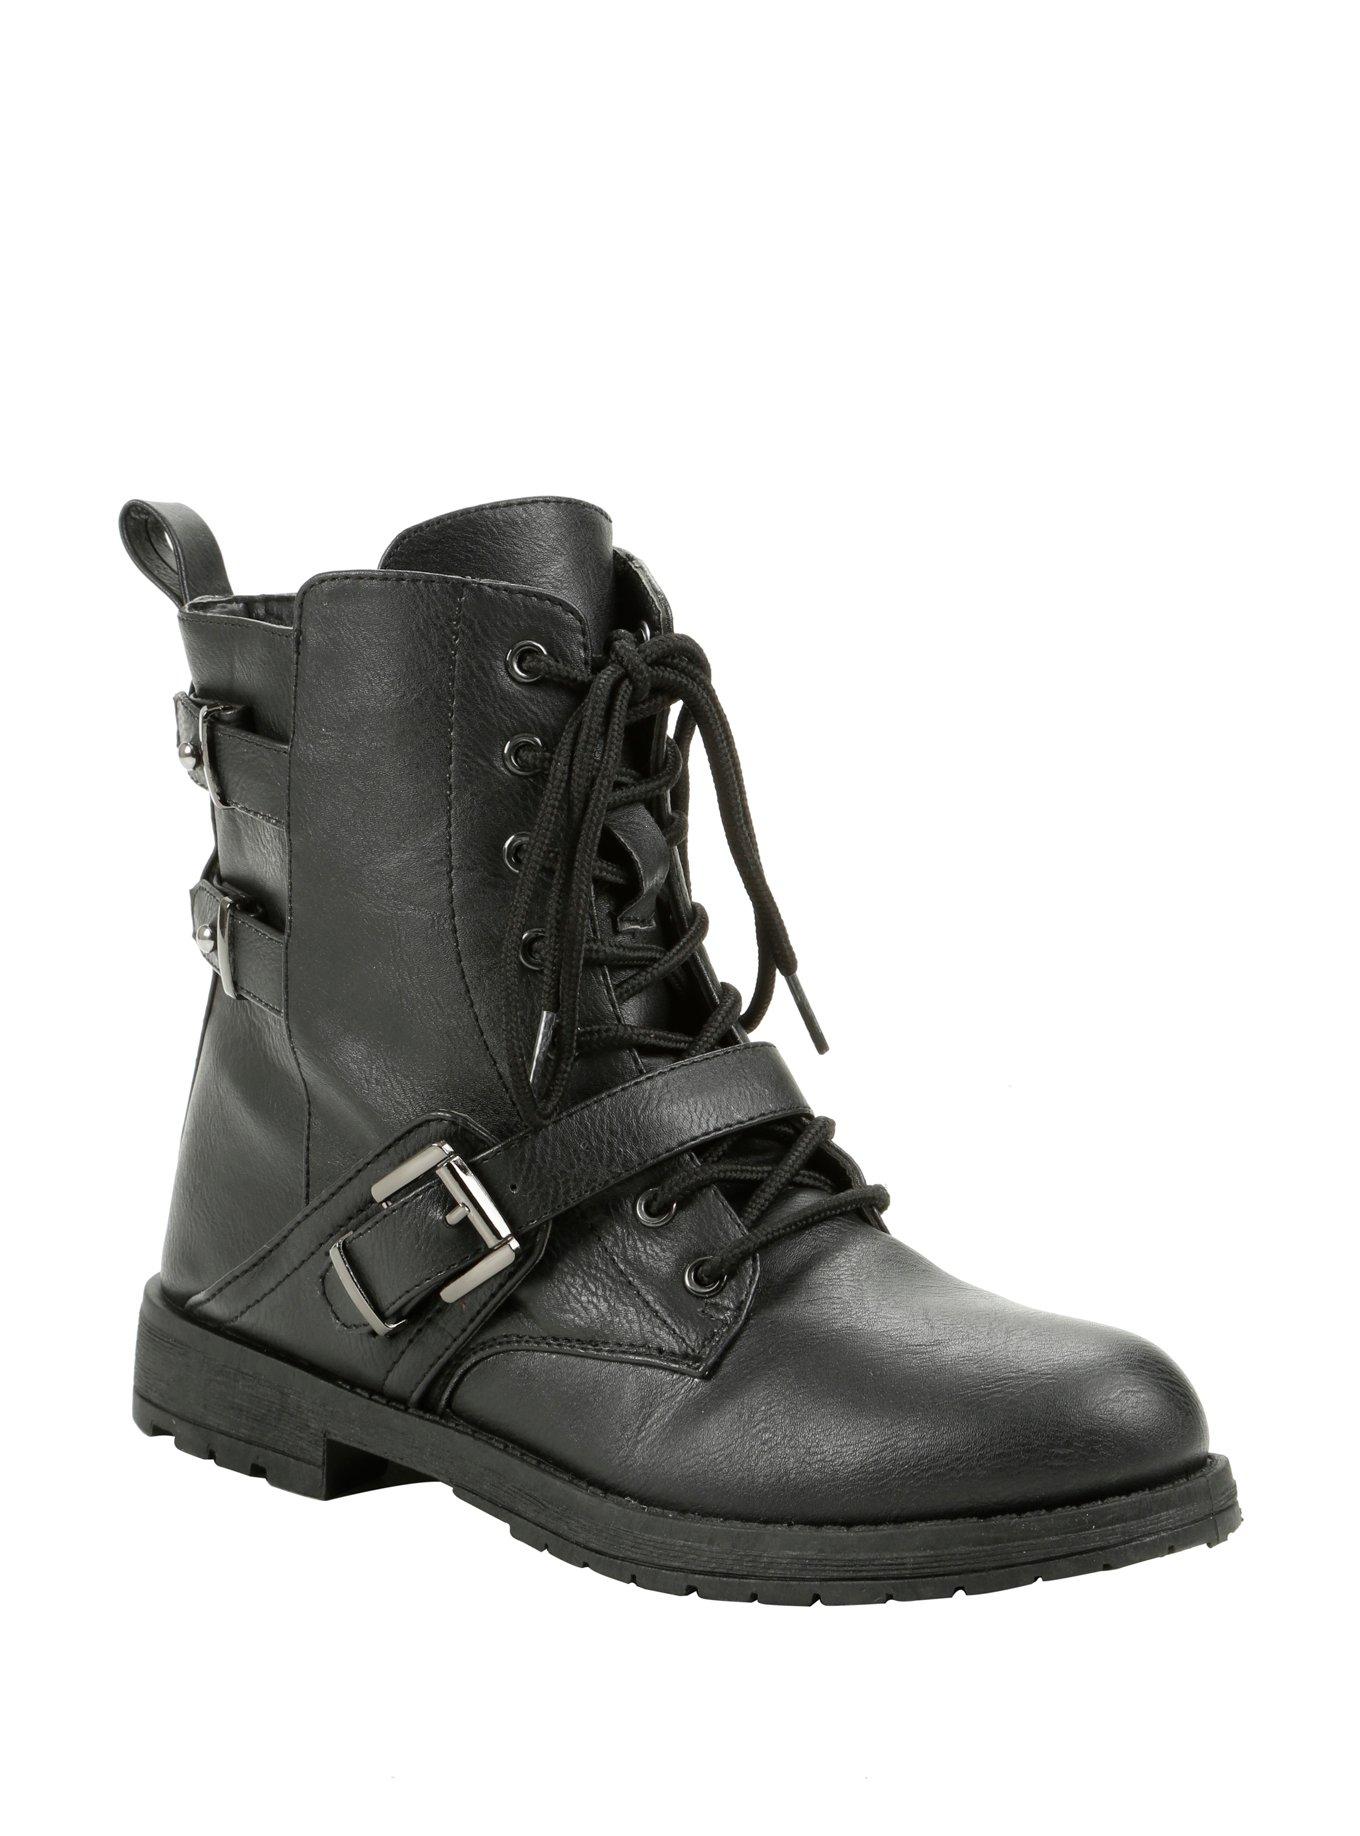 Black Single Buckle Low Combat Boots | Hot Topic